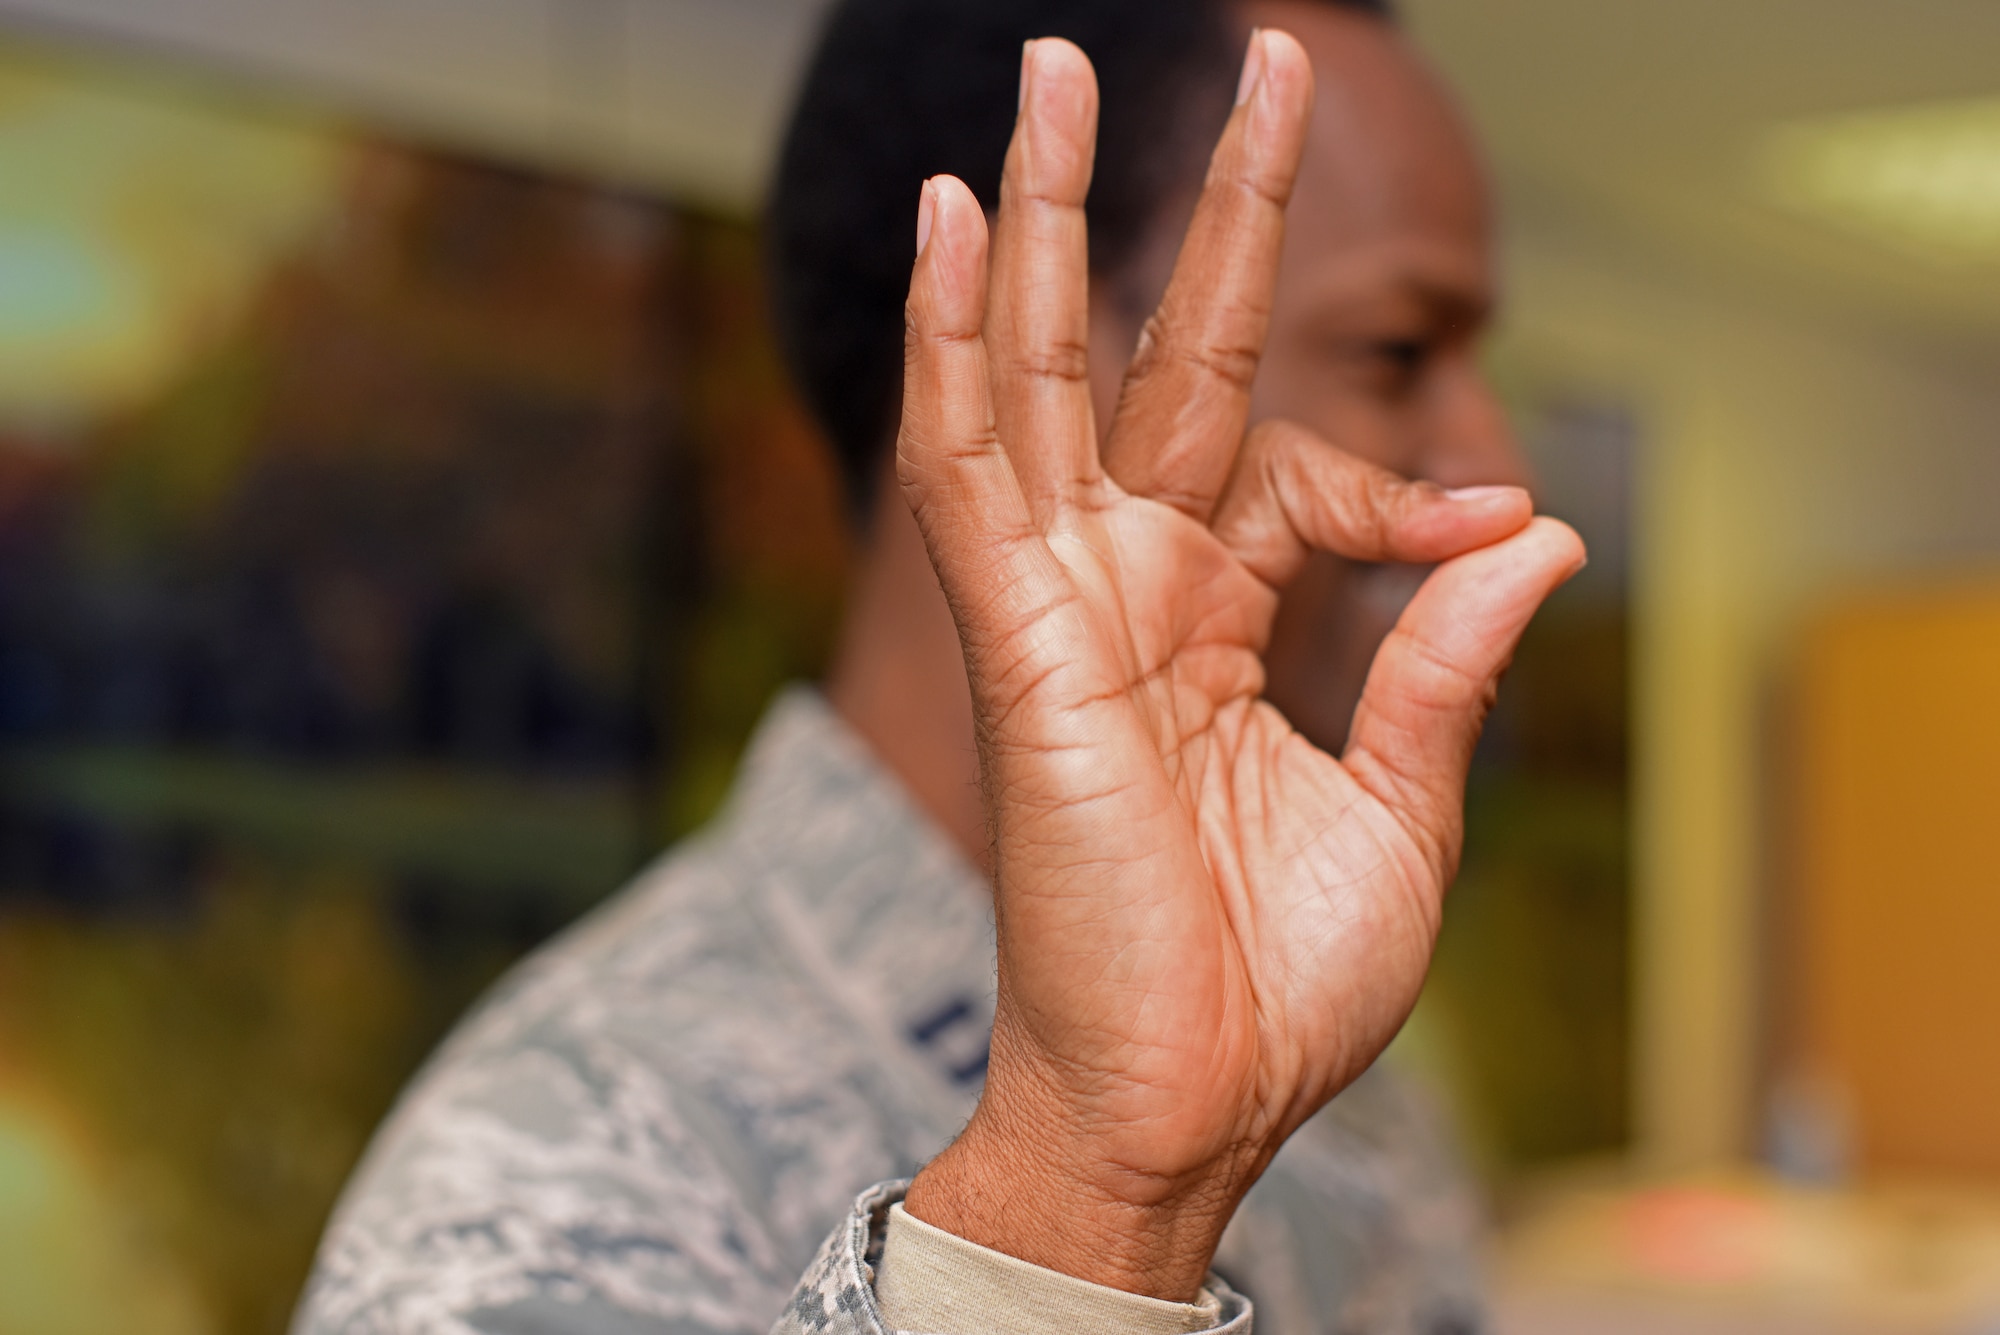 U.S. Air Force Chaplain Capt. Kennie Neal, 100th Air Refueling Wing chaplain, presents the American Sign Language gesture that represents the number nine during an ASL workshop at RAF Mildenhall, England, Oct. 23, 2018. The workshop, which is free and open to all Airmen and their families, is part of a ‘Workplace Etiquettes” action plan developed by the Airman and Family Readiness Center. (U.S. Air Force photo by Airman 1st Class Brandon Esau)